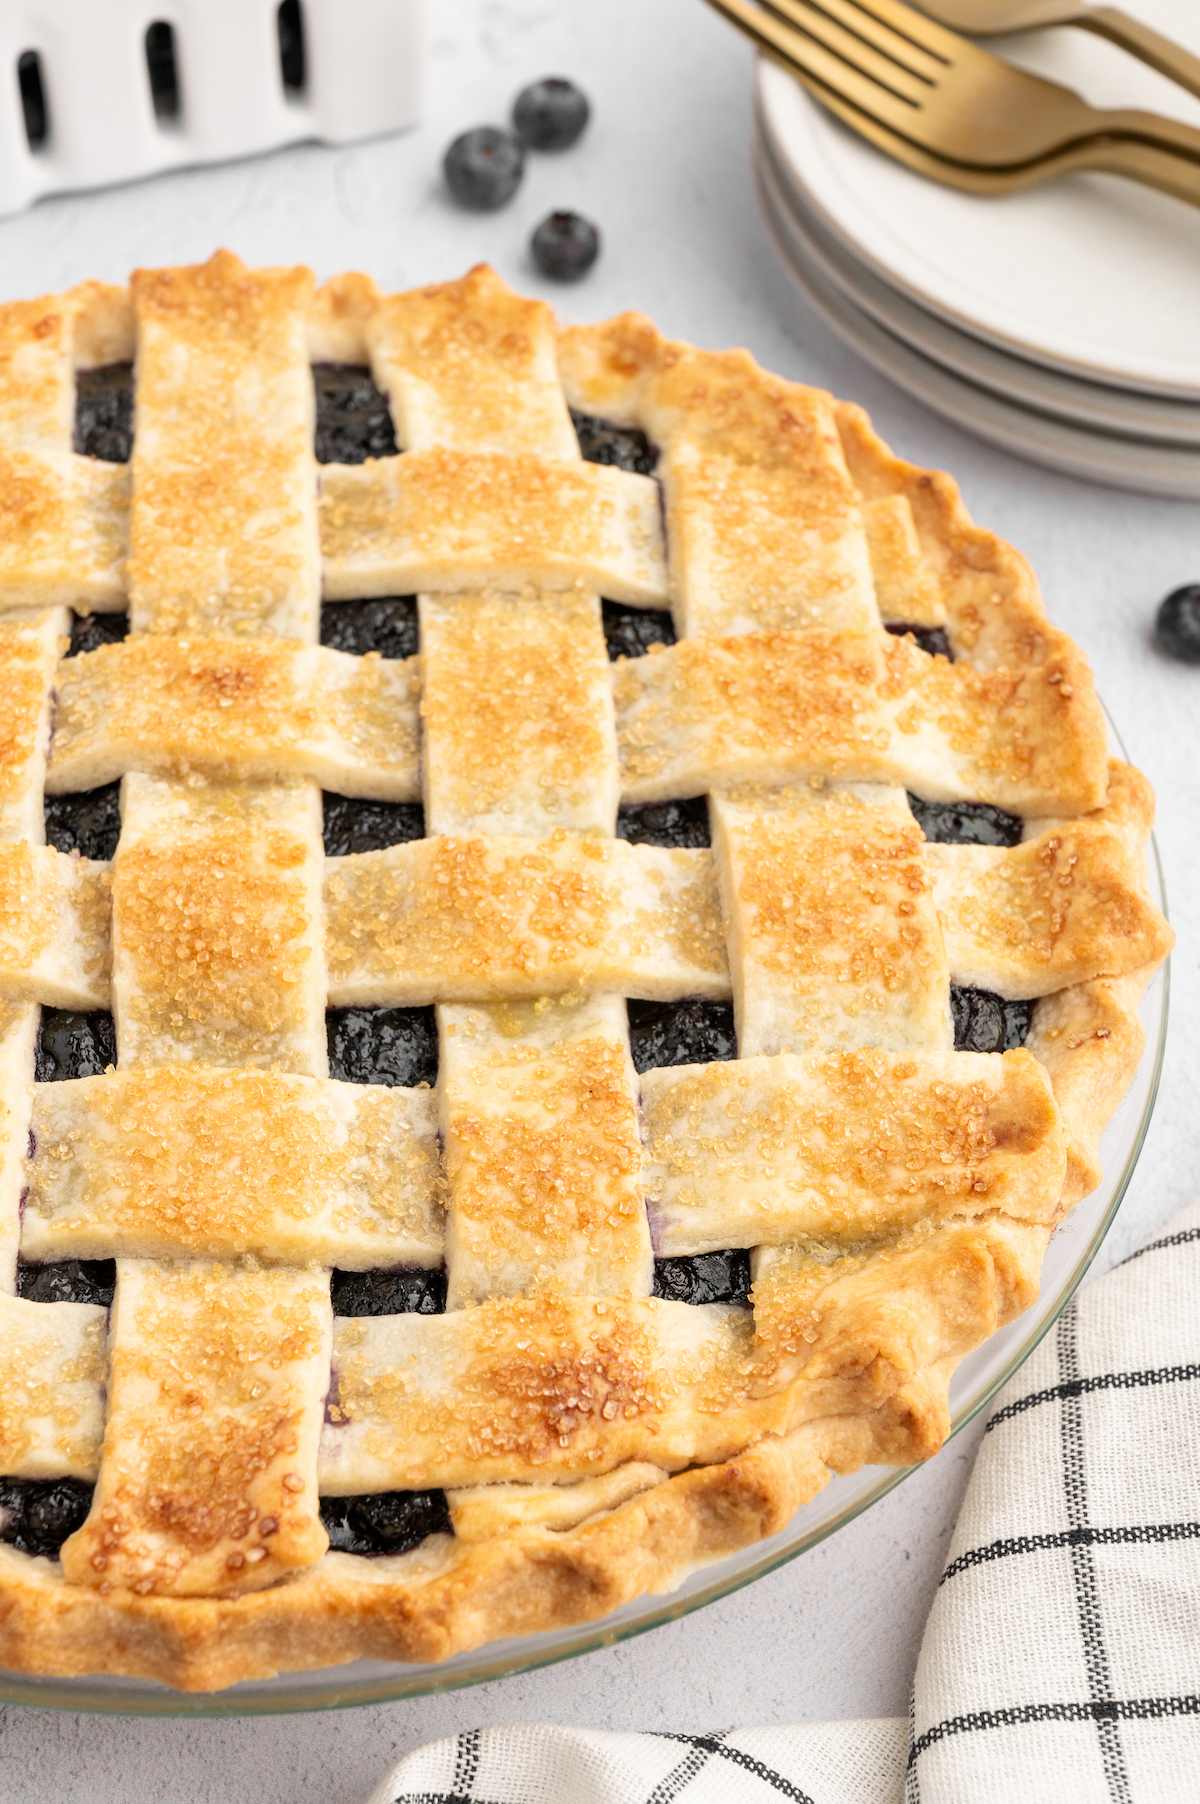 Vegan blueberry pie with a latticed pattern crust on top, baked to golden perfection.